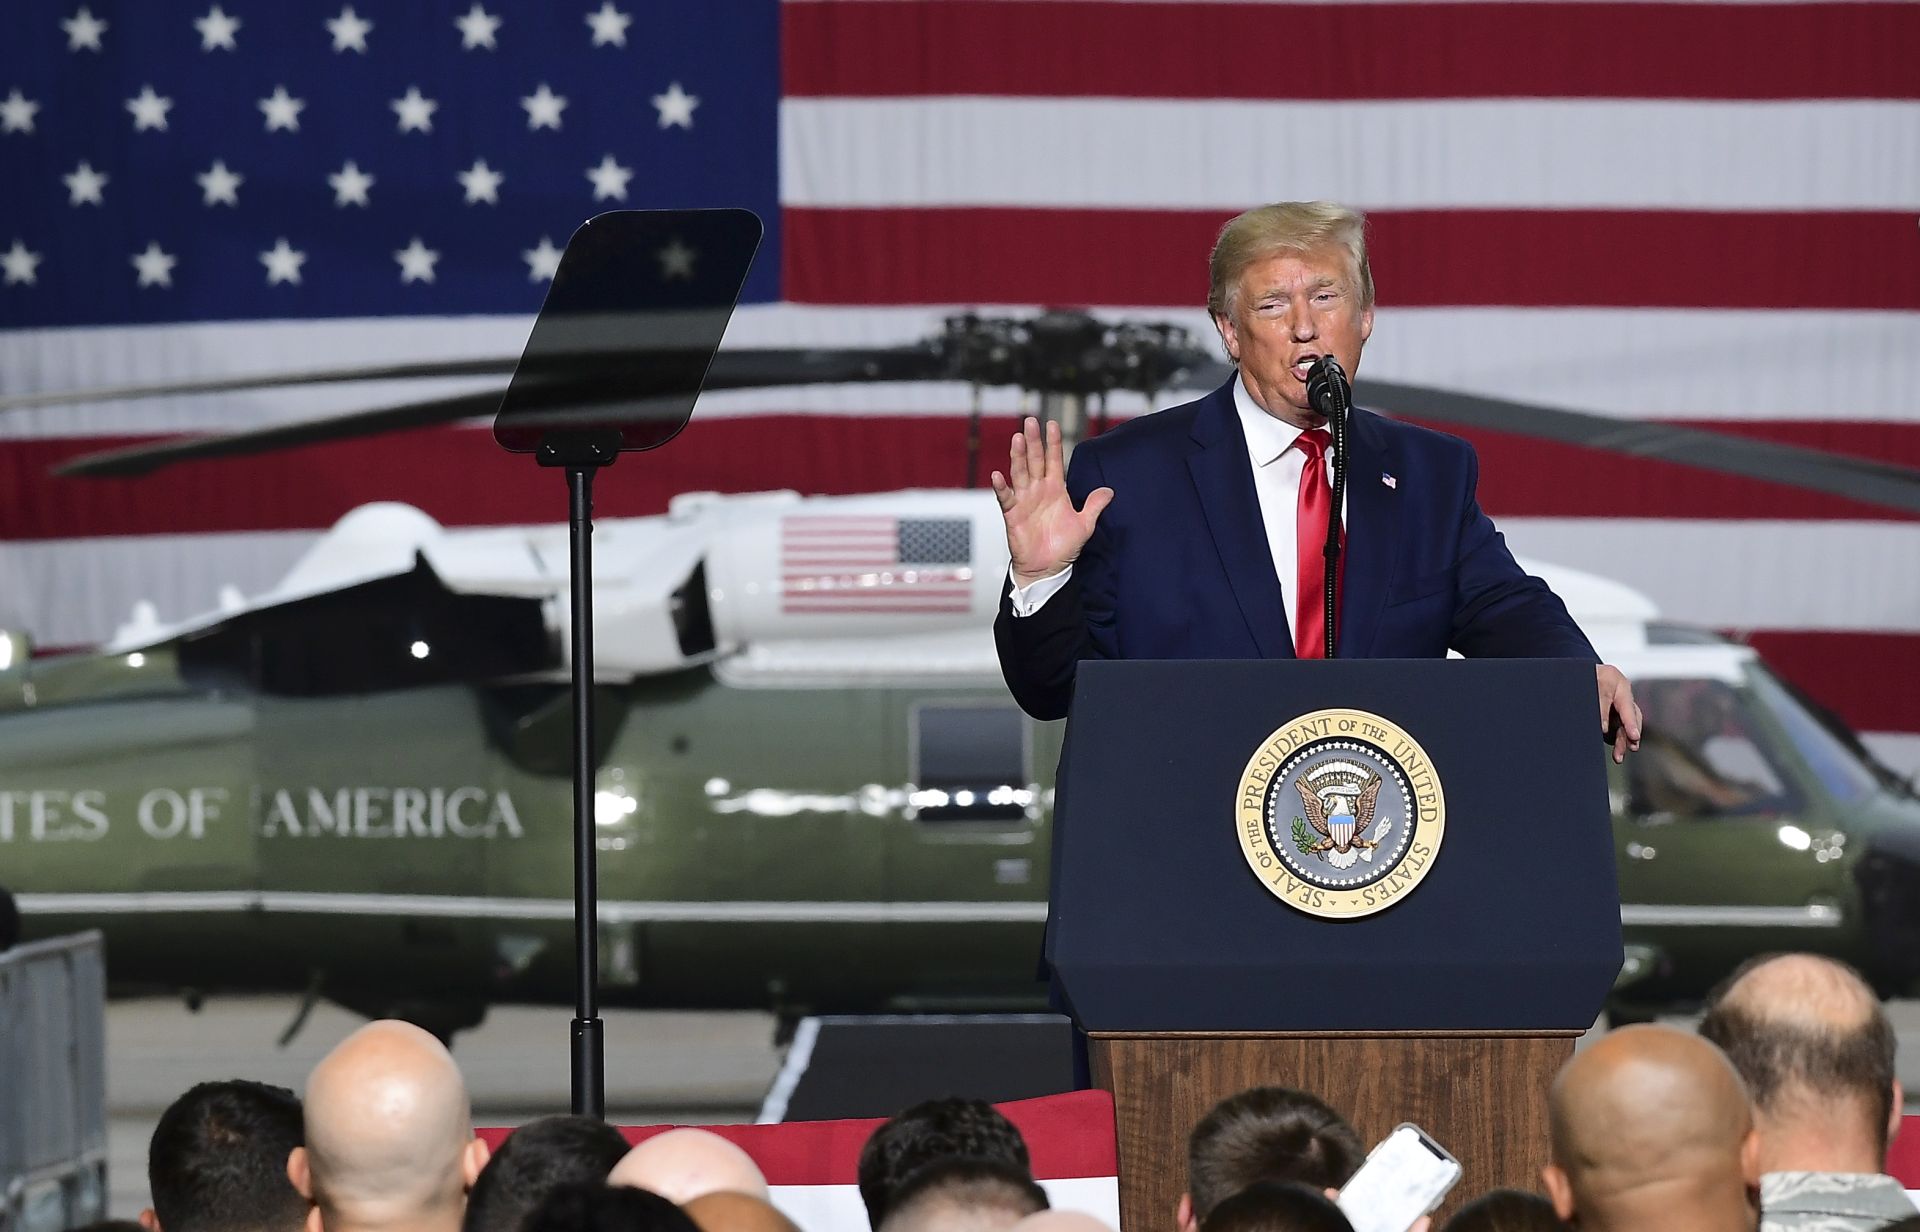 epa07684239 US President Donald J. Trump (C) speaks during a meeting with soldiers of the United States Forces in Korea (USFK) at the Osan Air Base in Pyeongtaek, Gyeonggi-do, South Korea, 30 June 2019.  The US leader arrived in South Korean on 29 June for a two-day visit that included a meeting with South Korean President Moon Jae-in and North Korean leader Kim Jong-un in the Demilitarized Zone that separates the two Koreas.  EPA/KIM MIN-HEE